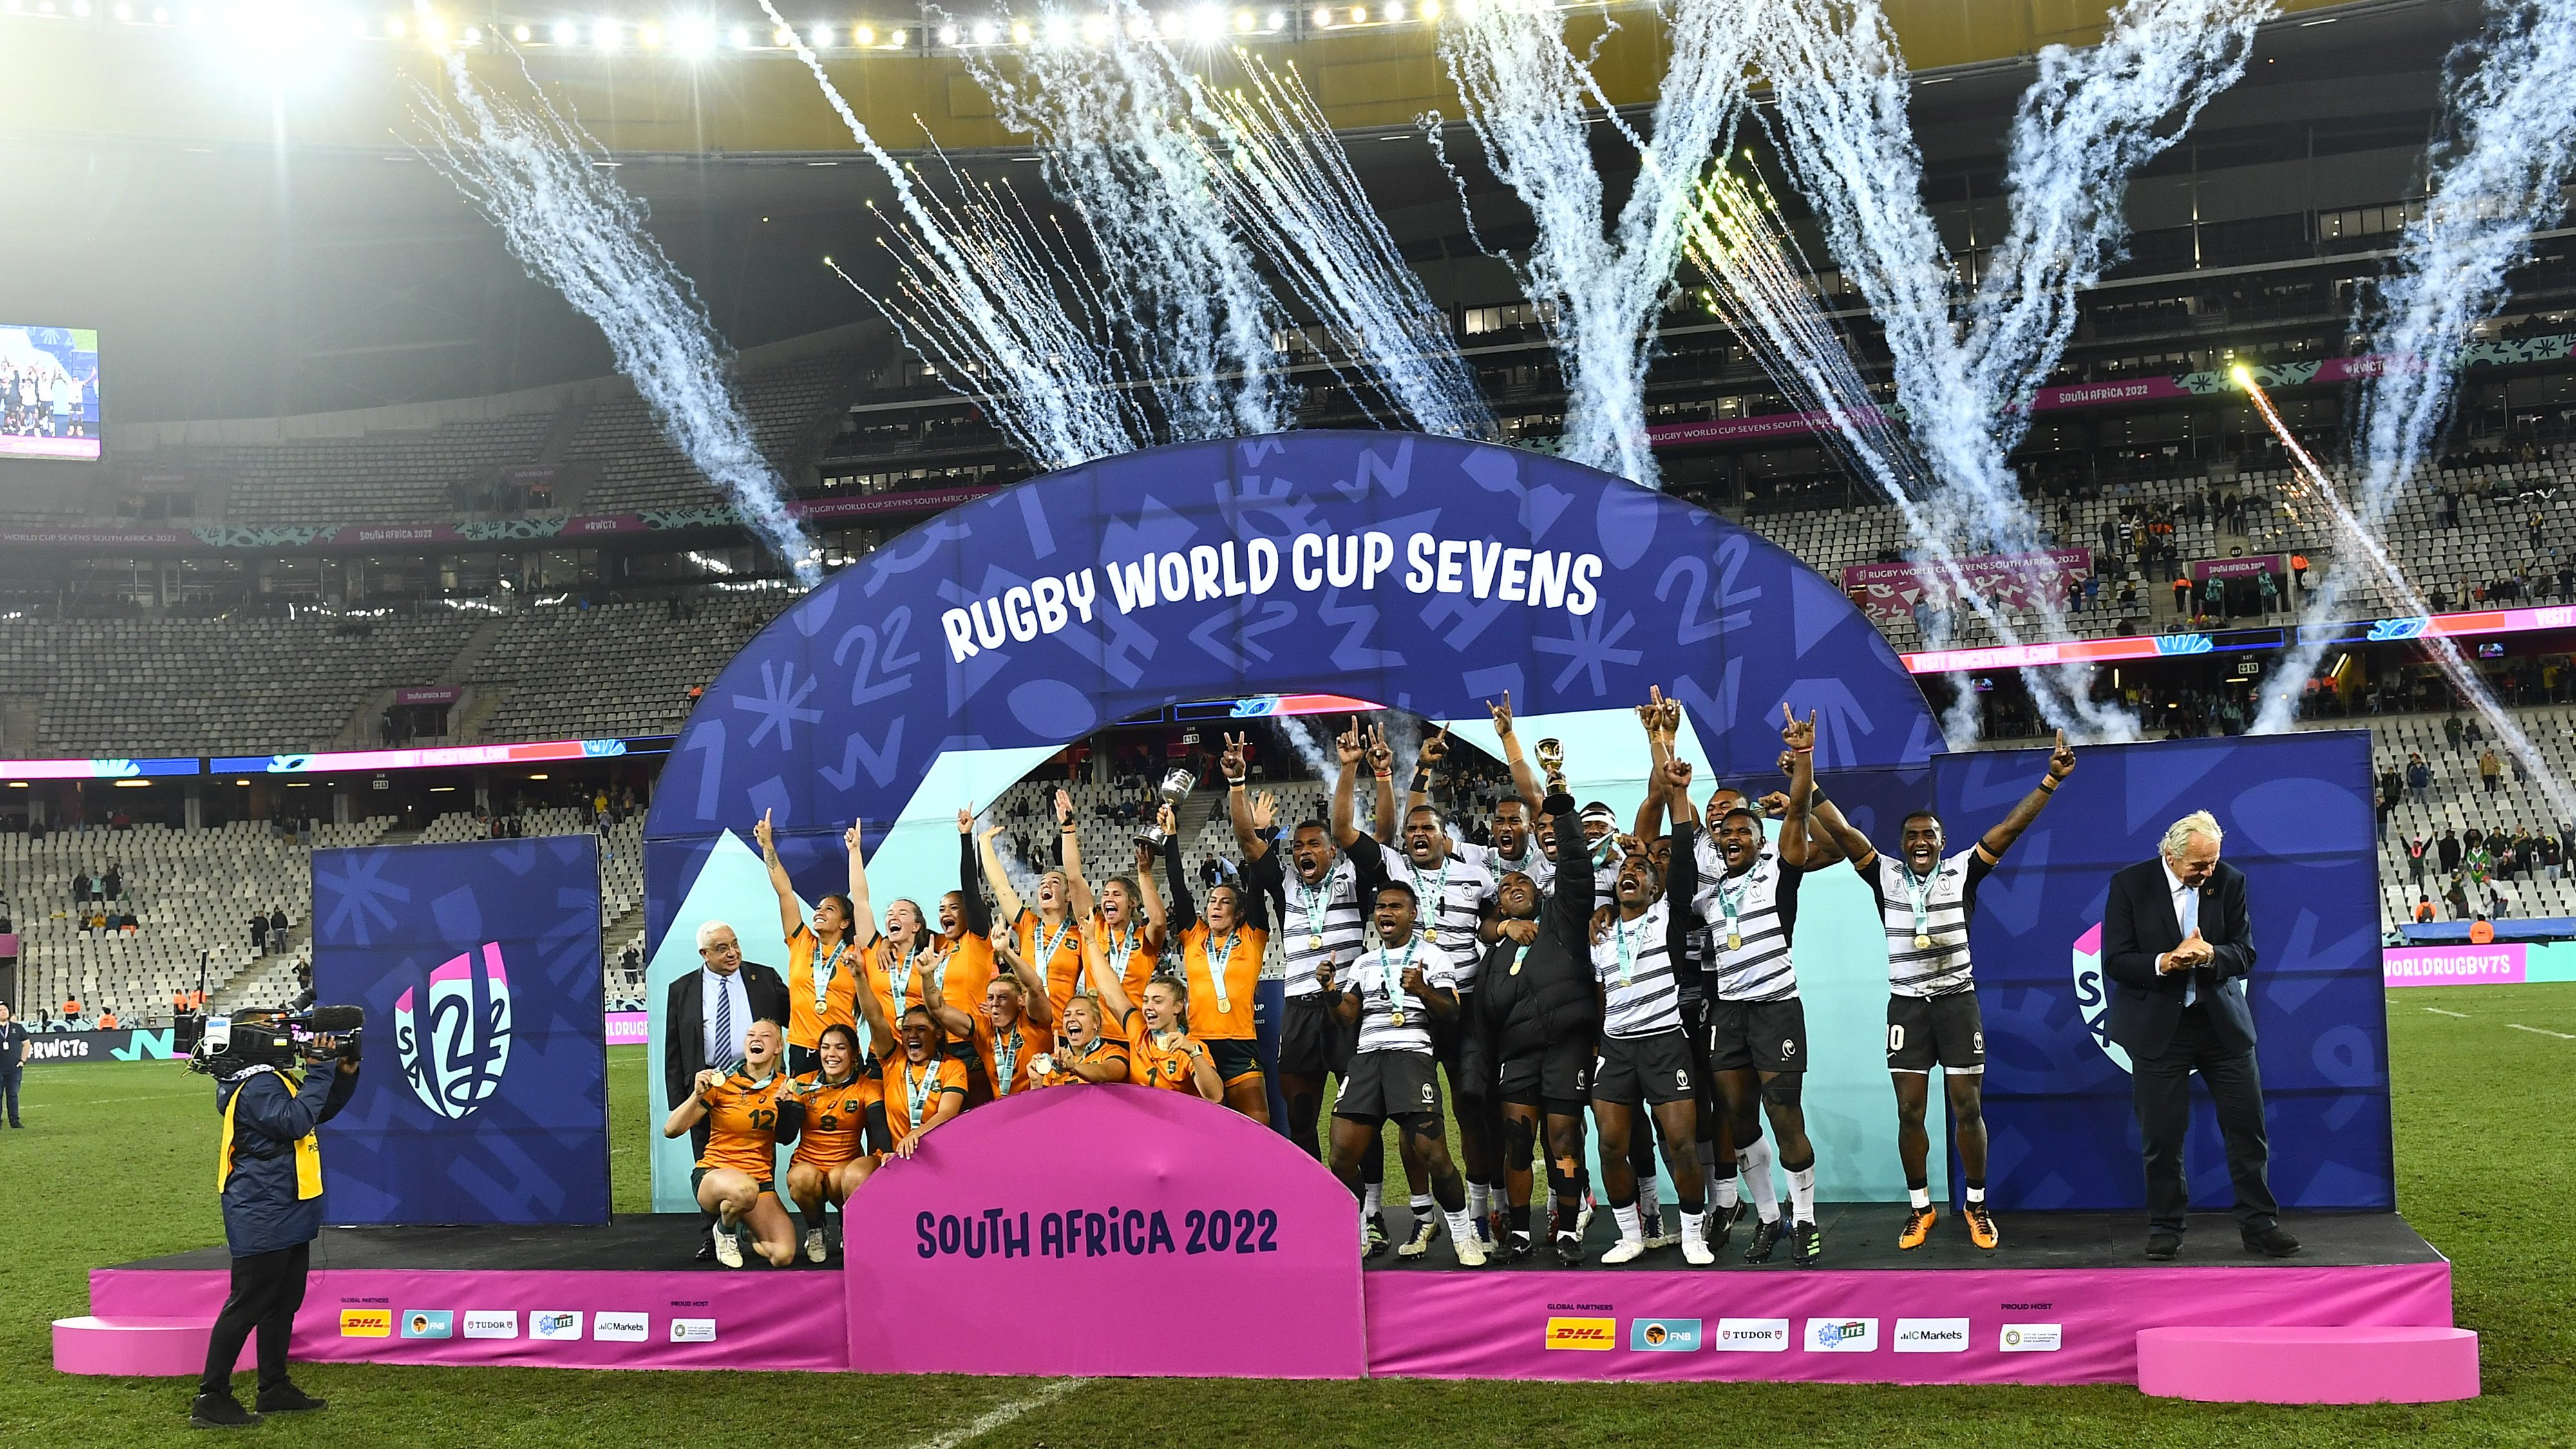 Fiji Men's, Australia Women's Teams Crowned Rugby World Cup Sevens 2022 Champions